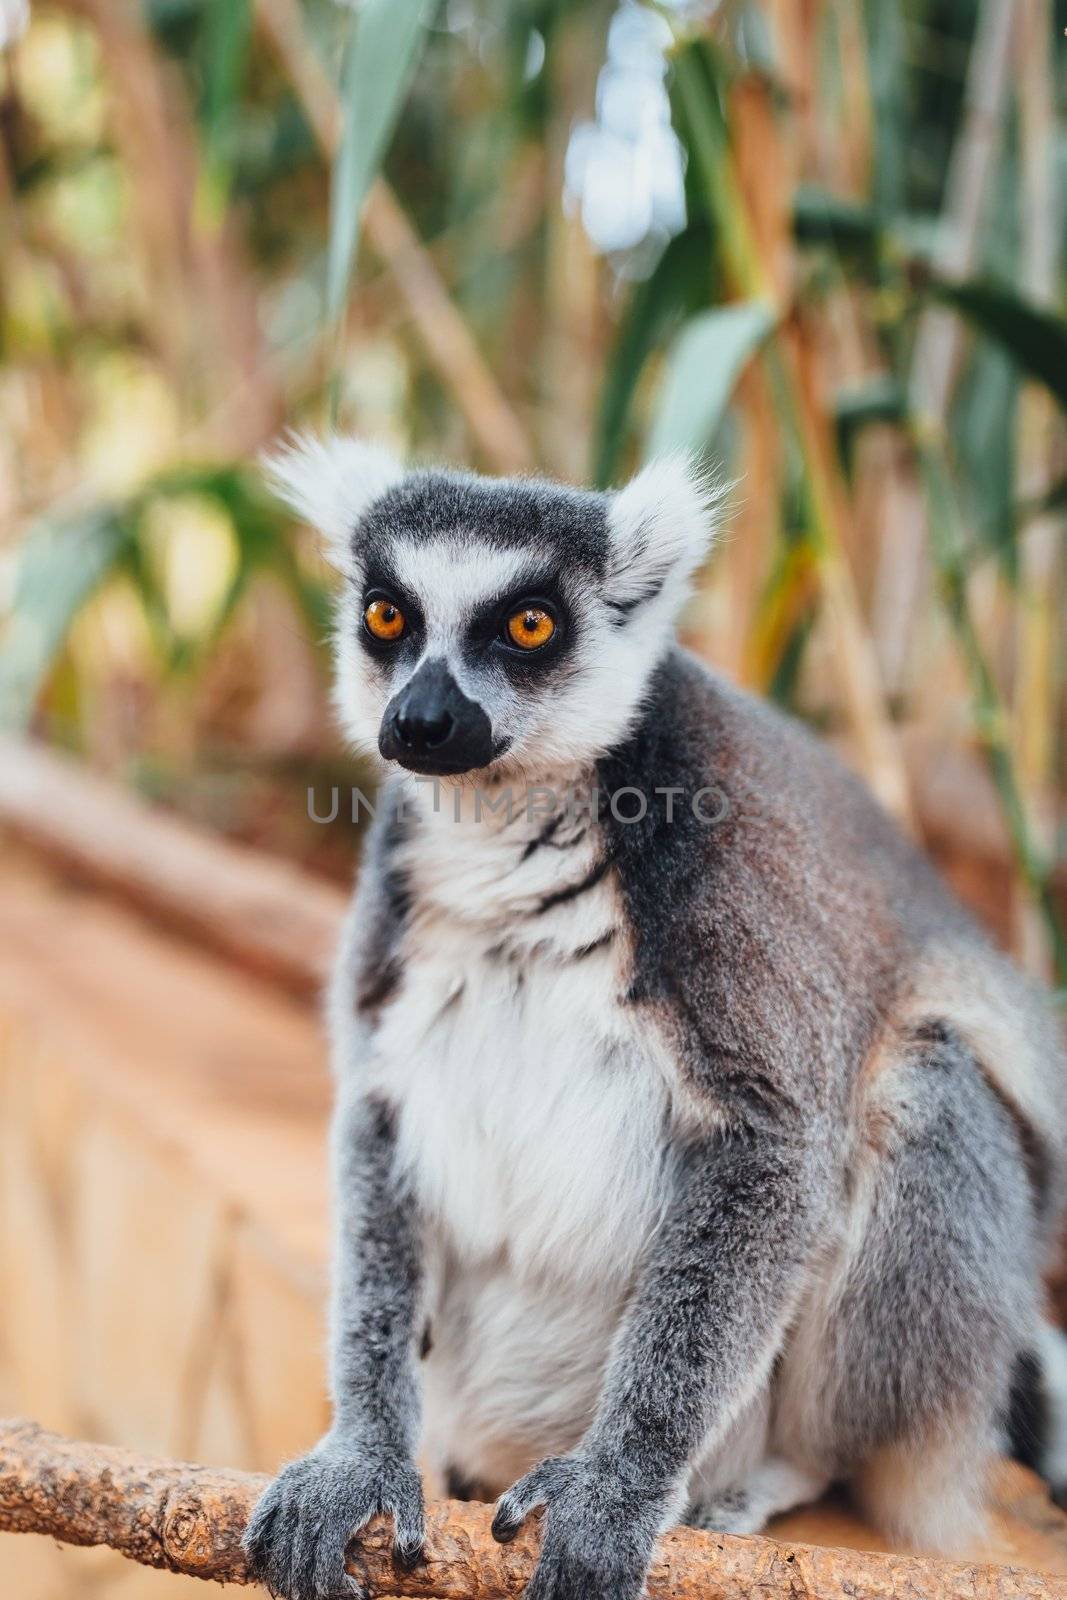 ring-tailed lemur, close-up view by nikkytok